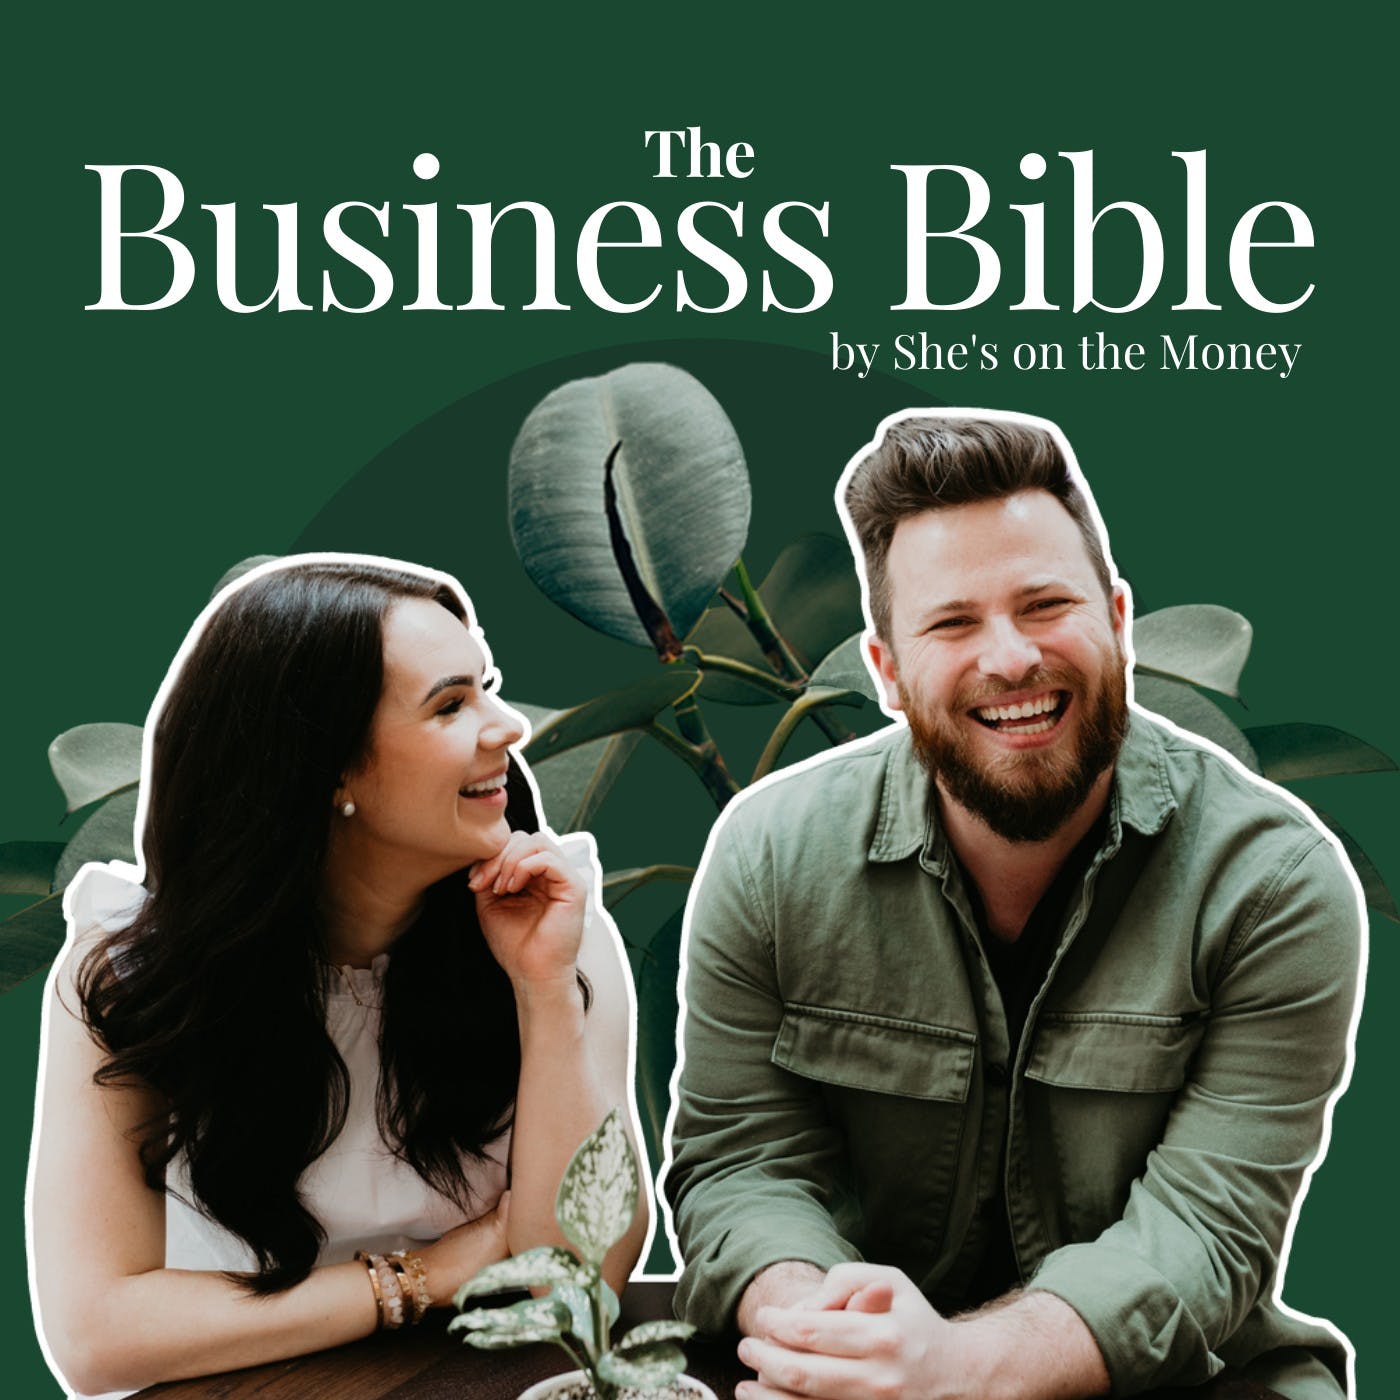 TRAILER - The Business Bible